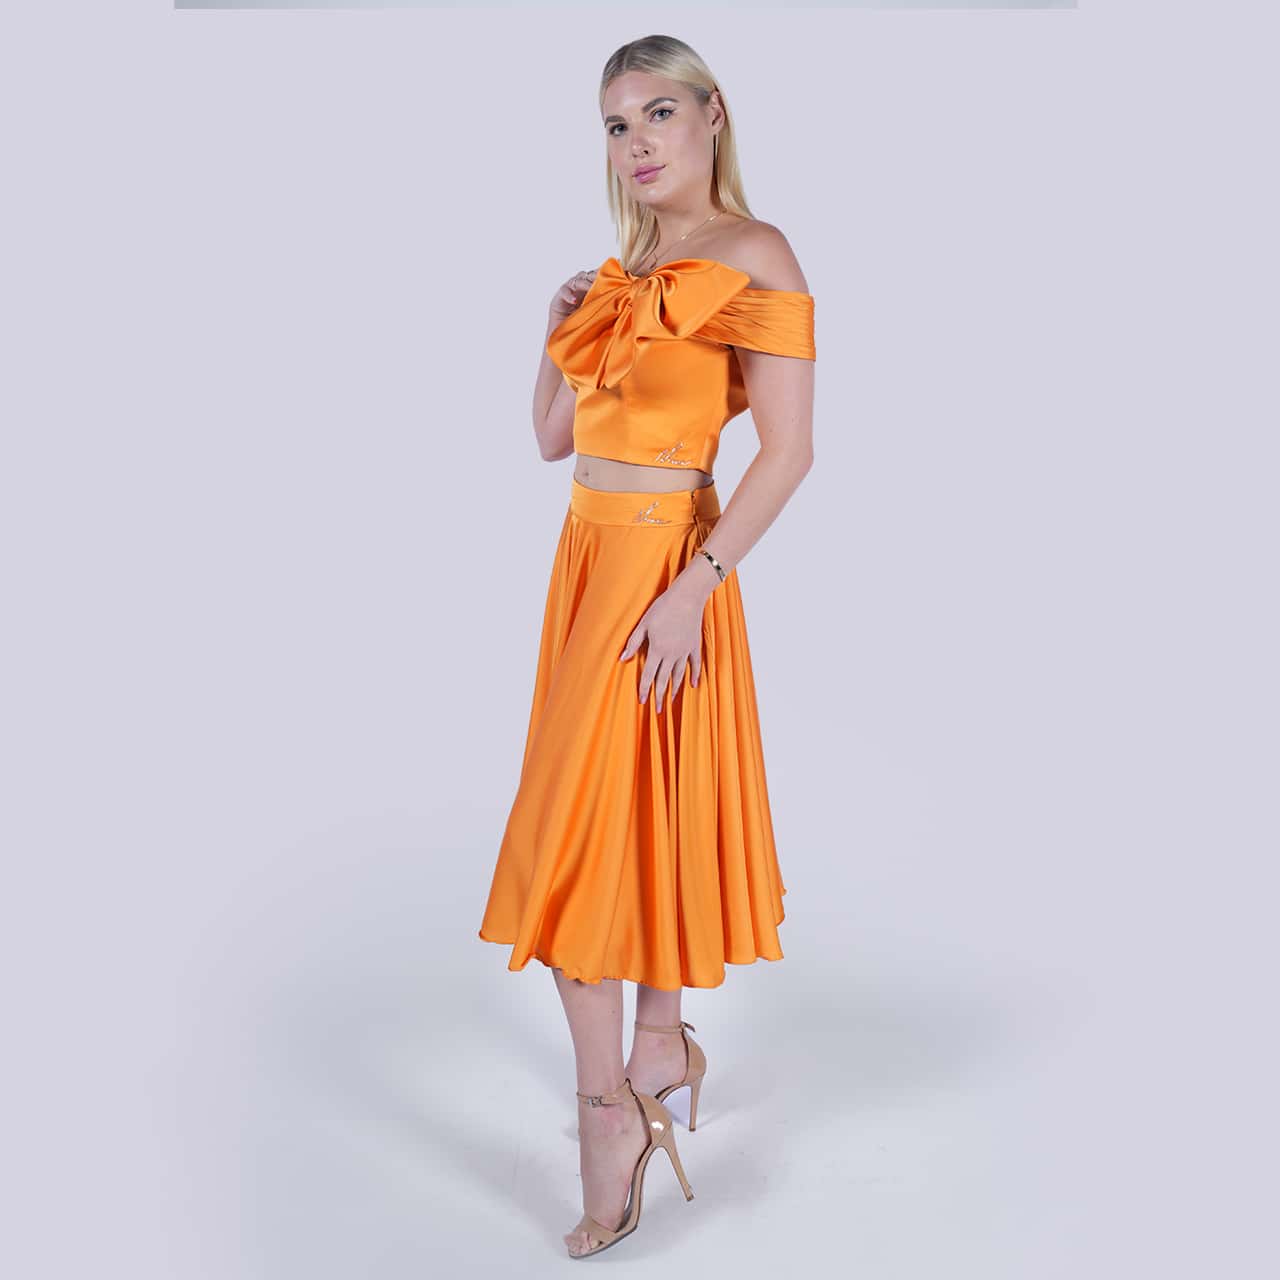 Butterfly - Co Ord Skirt Set - NIVA Fashion House 